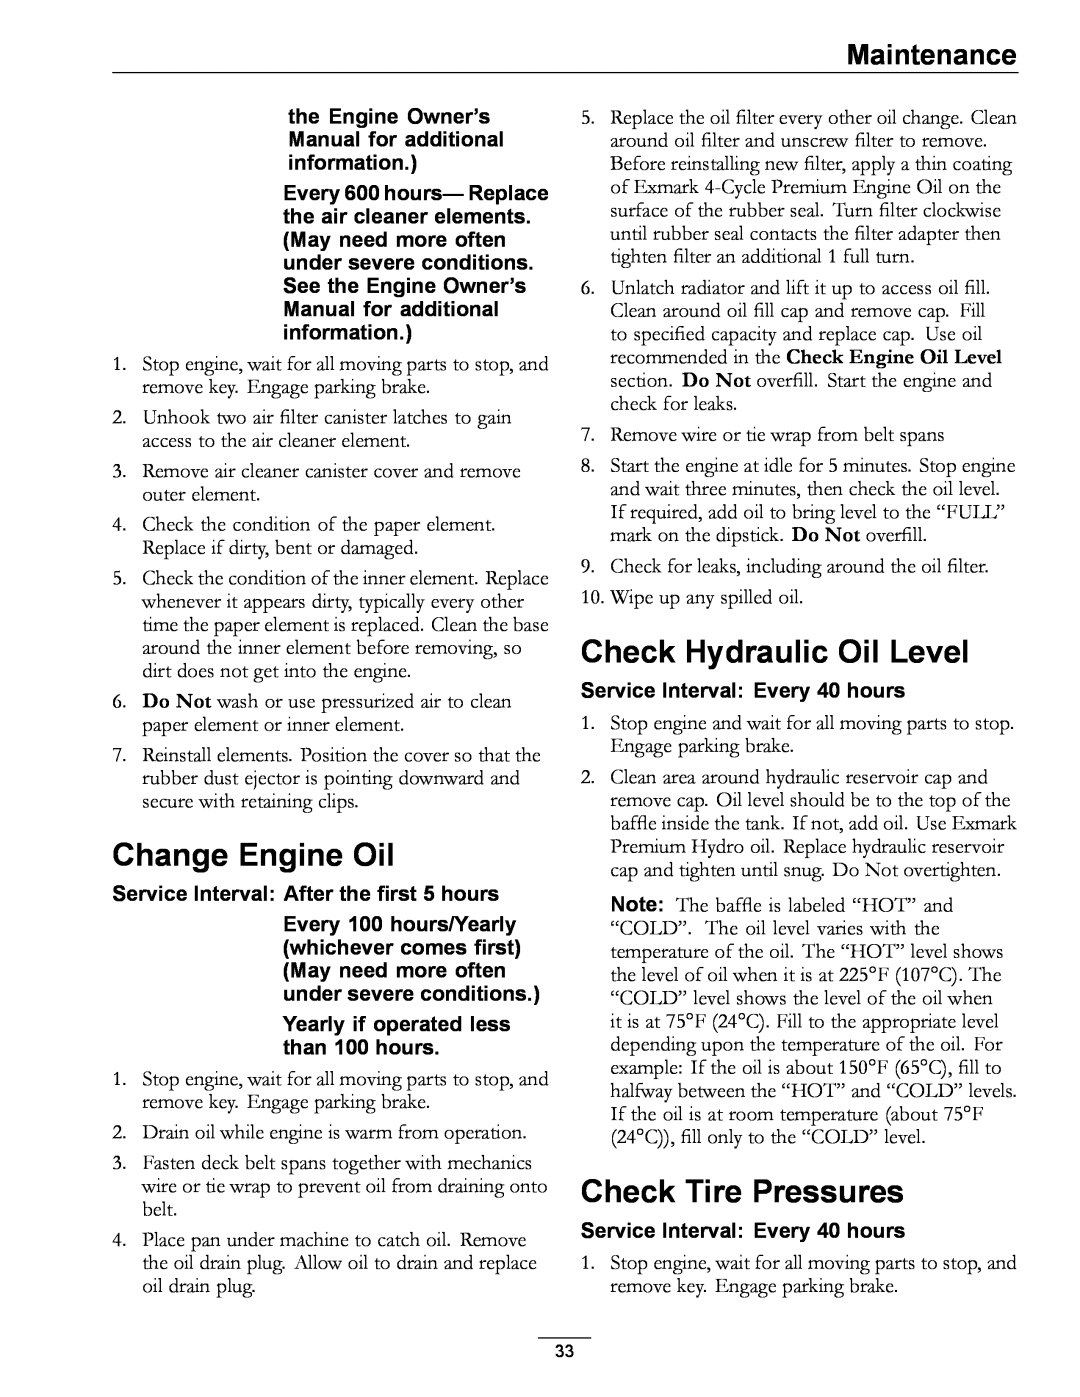 Exmark 920 Change Engine Oil, Check Hydraulic Oil Level, Check Tire Pressures, Service Interval After the first 5 hours 